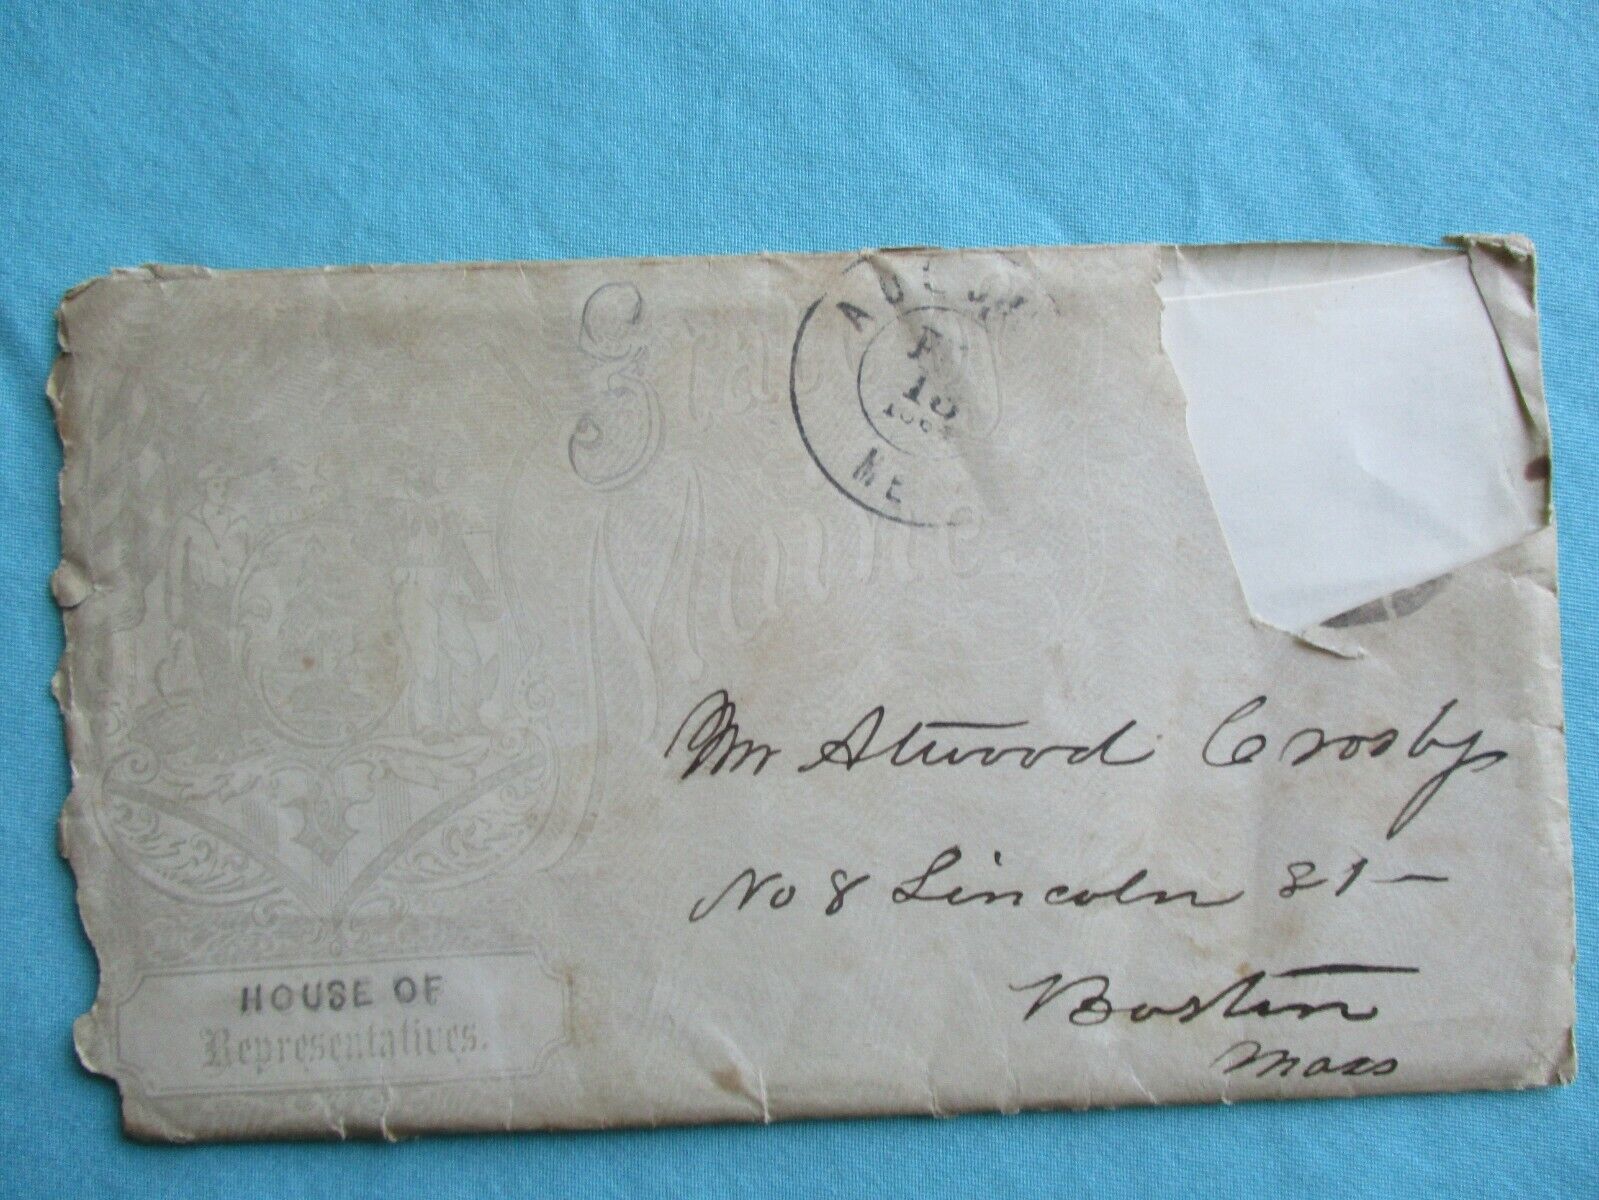 1864 Bull Run/Libby Prison Atwood Crosby/N.R.Surgeon Boutelle signed letter